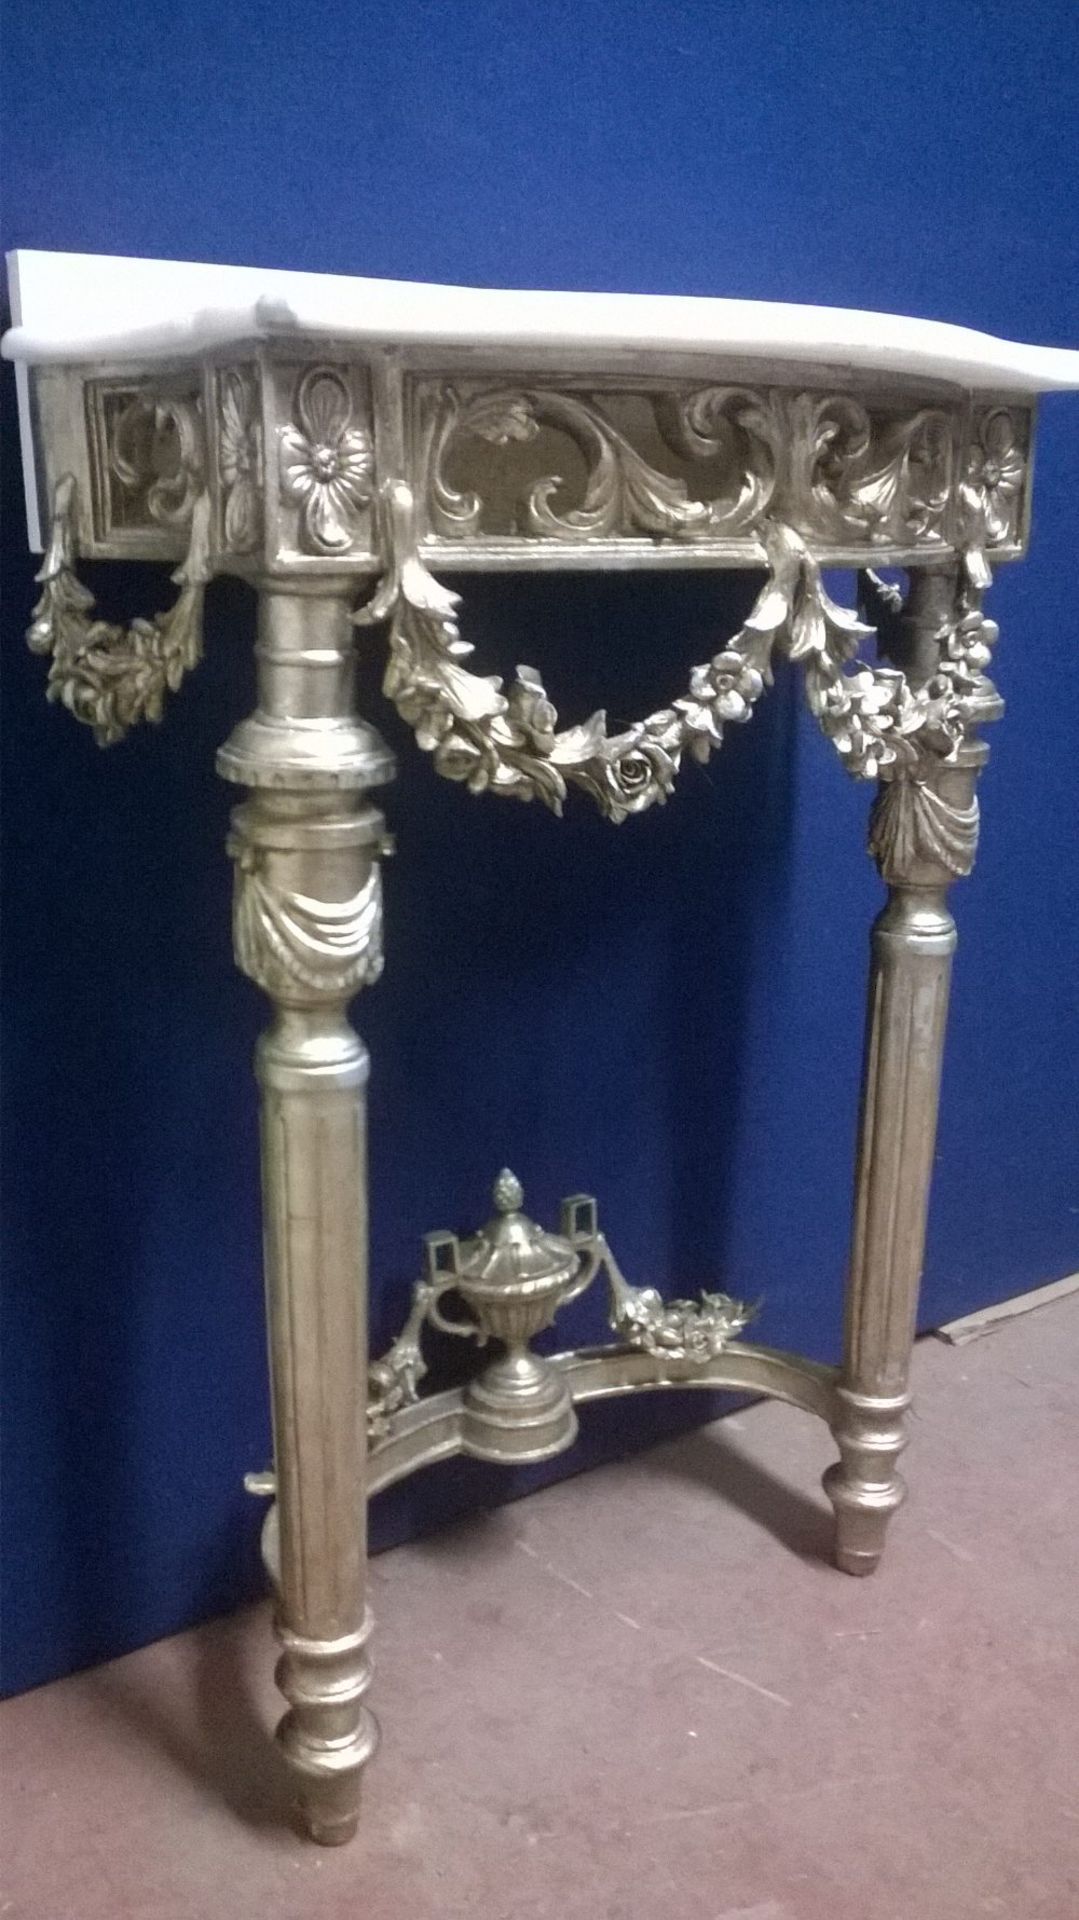 Silver Gilt Effect Metal Framed Salon Styling Station / Console Table with Marble Top - Image 5 of 8